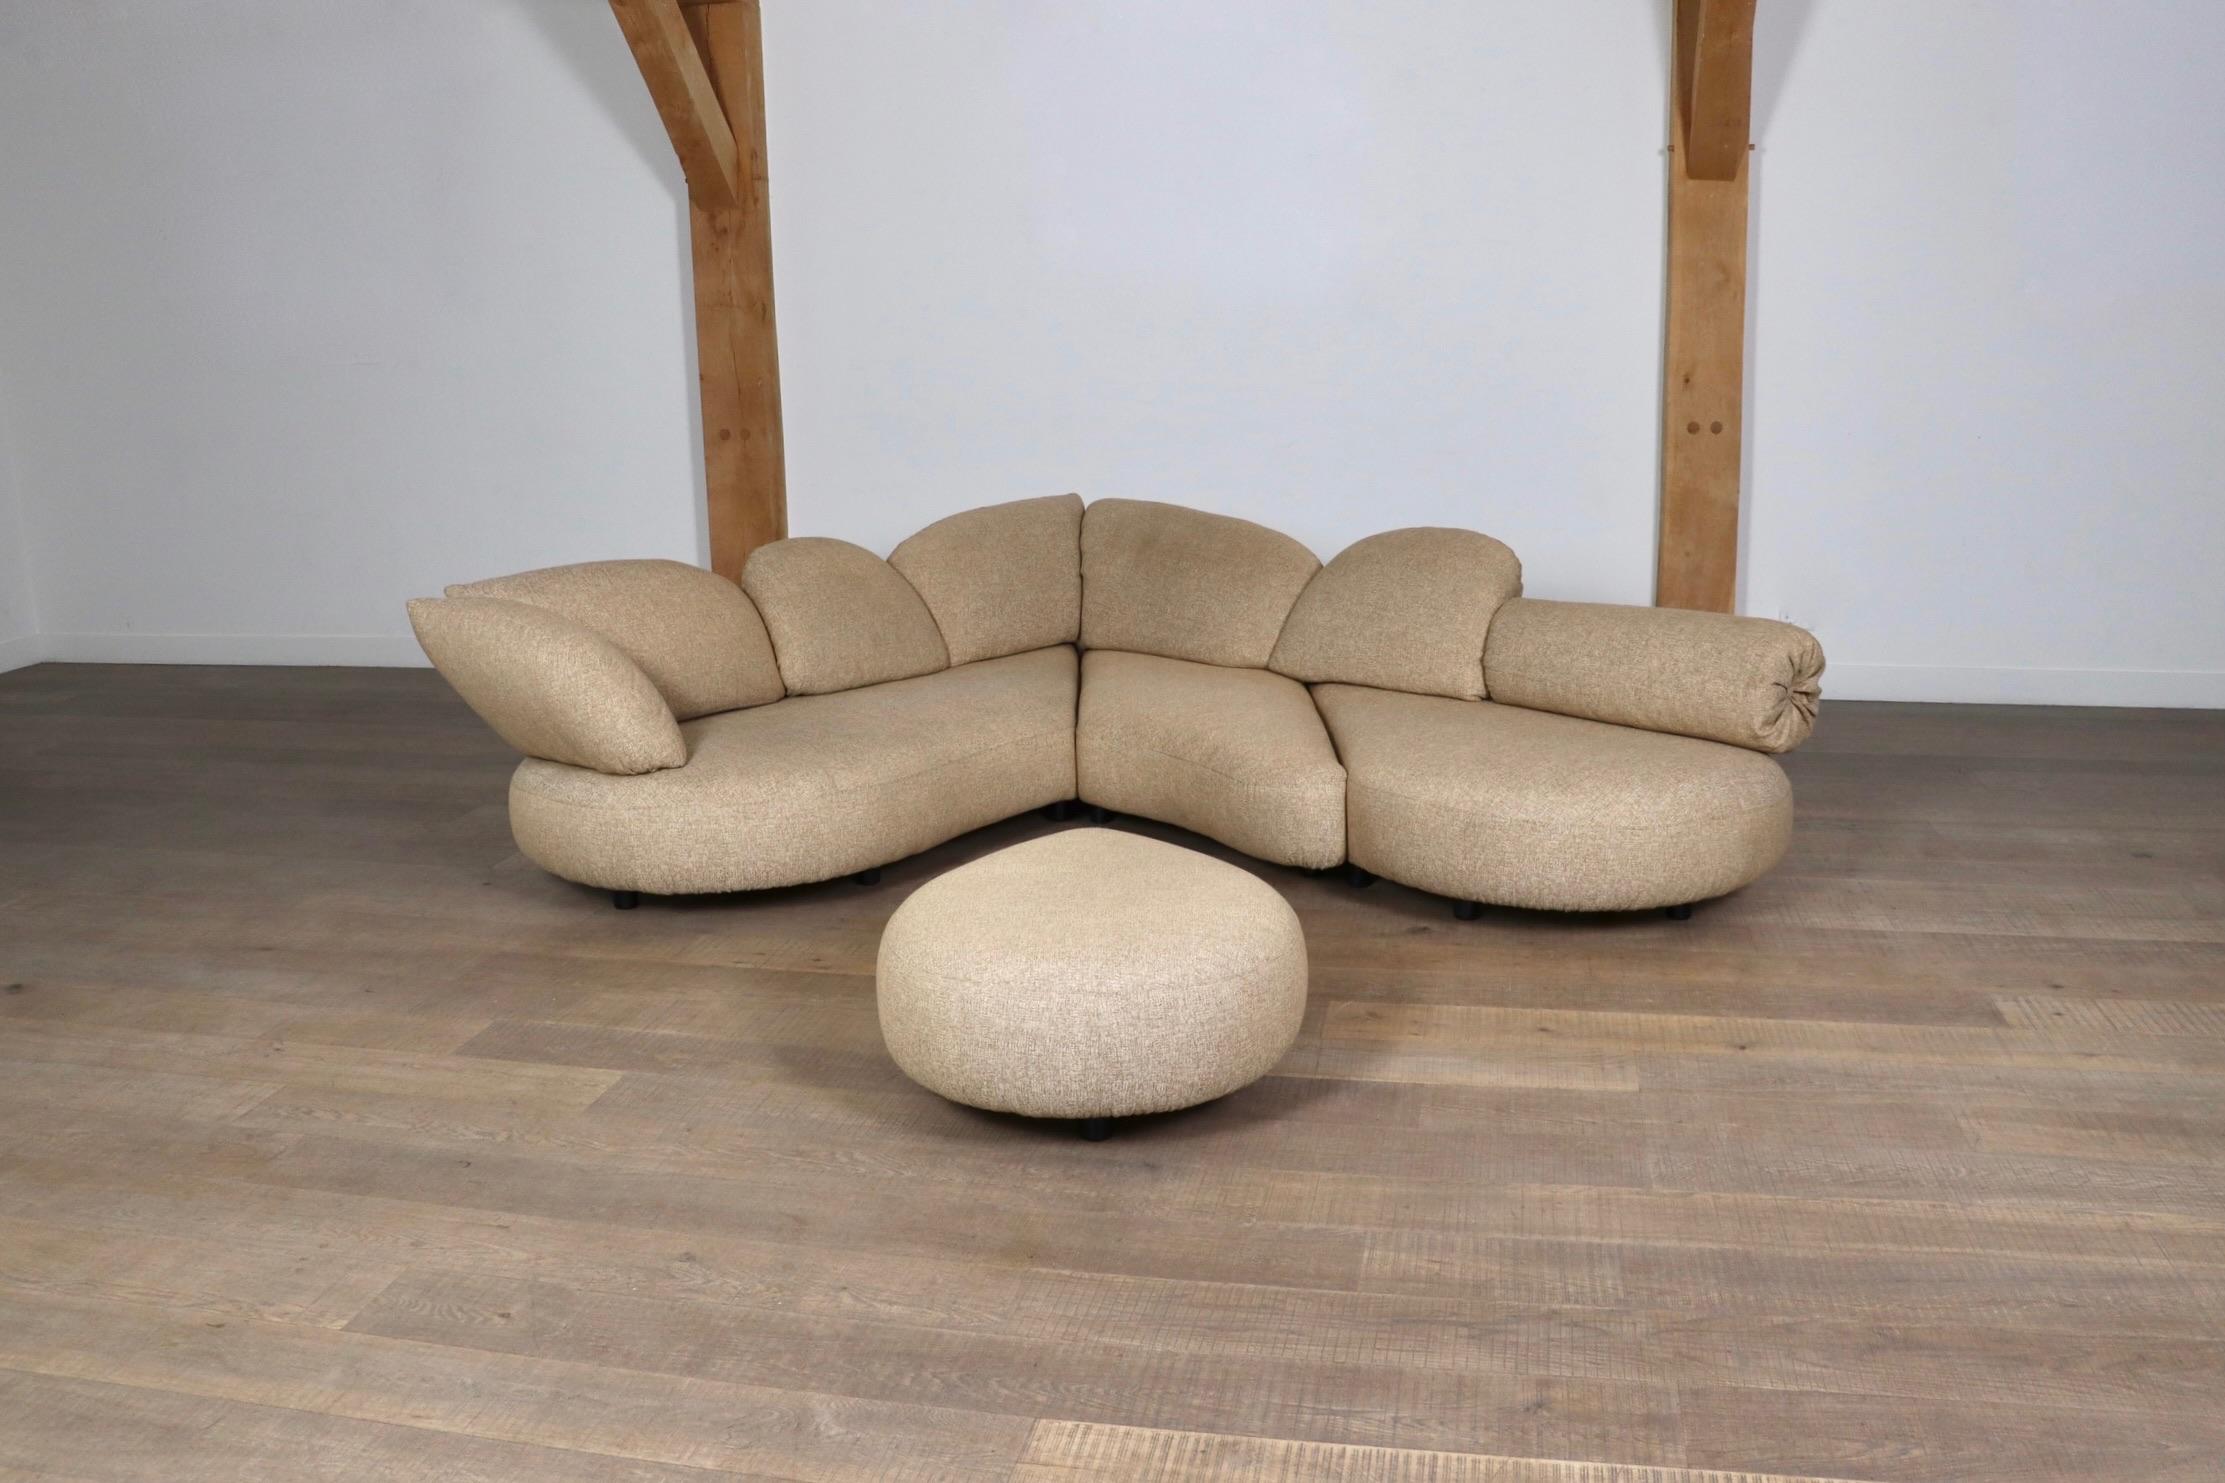 Amazing, organic shaped sofa by Wiener Werkstätte, Austria 1970s. A rare custom made design in the 1970s with each sofa to be a masterpiece. These one-of-a-kind sofas are to be recognized by its rounded organic shaped cushions laid out in a playful,